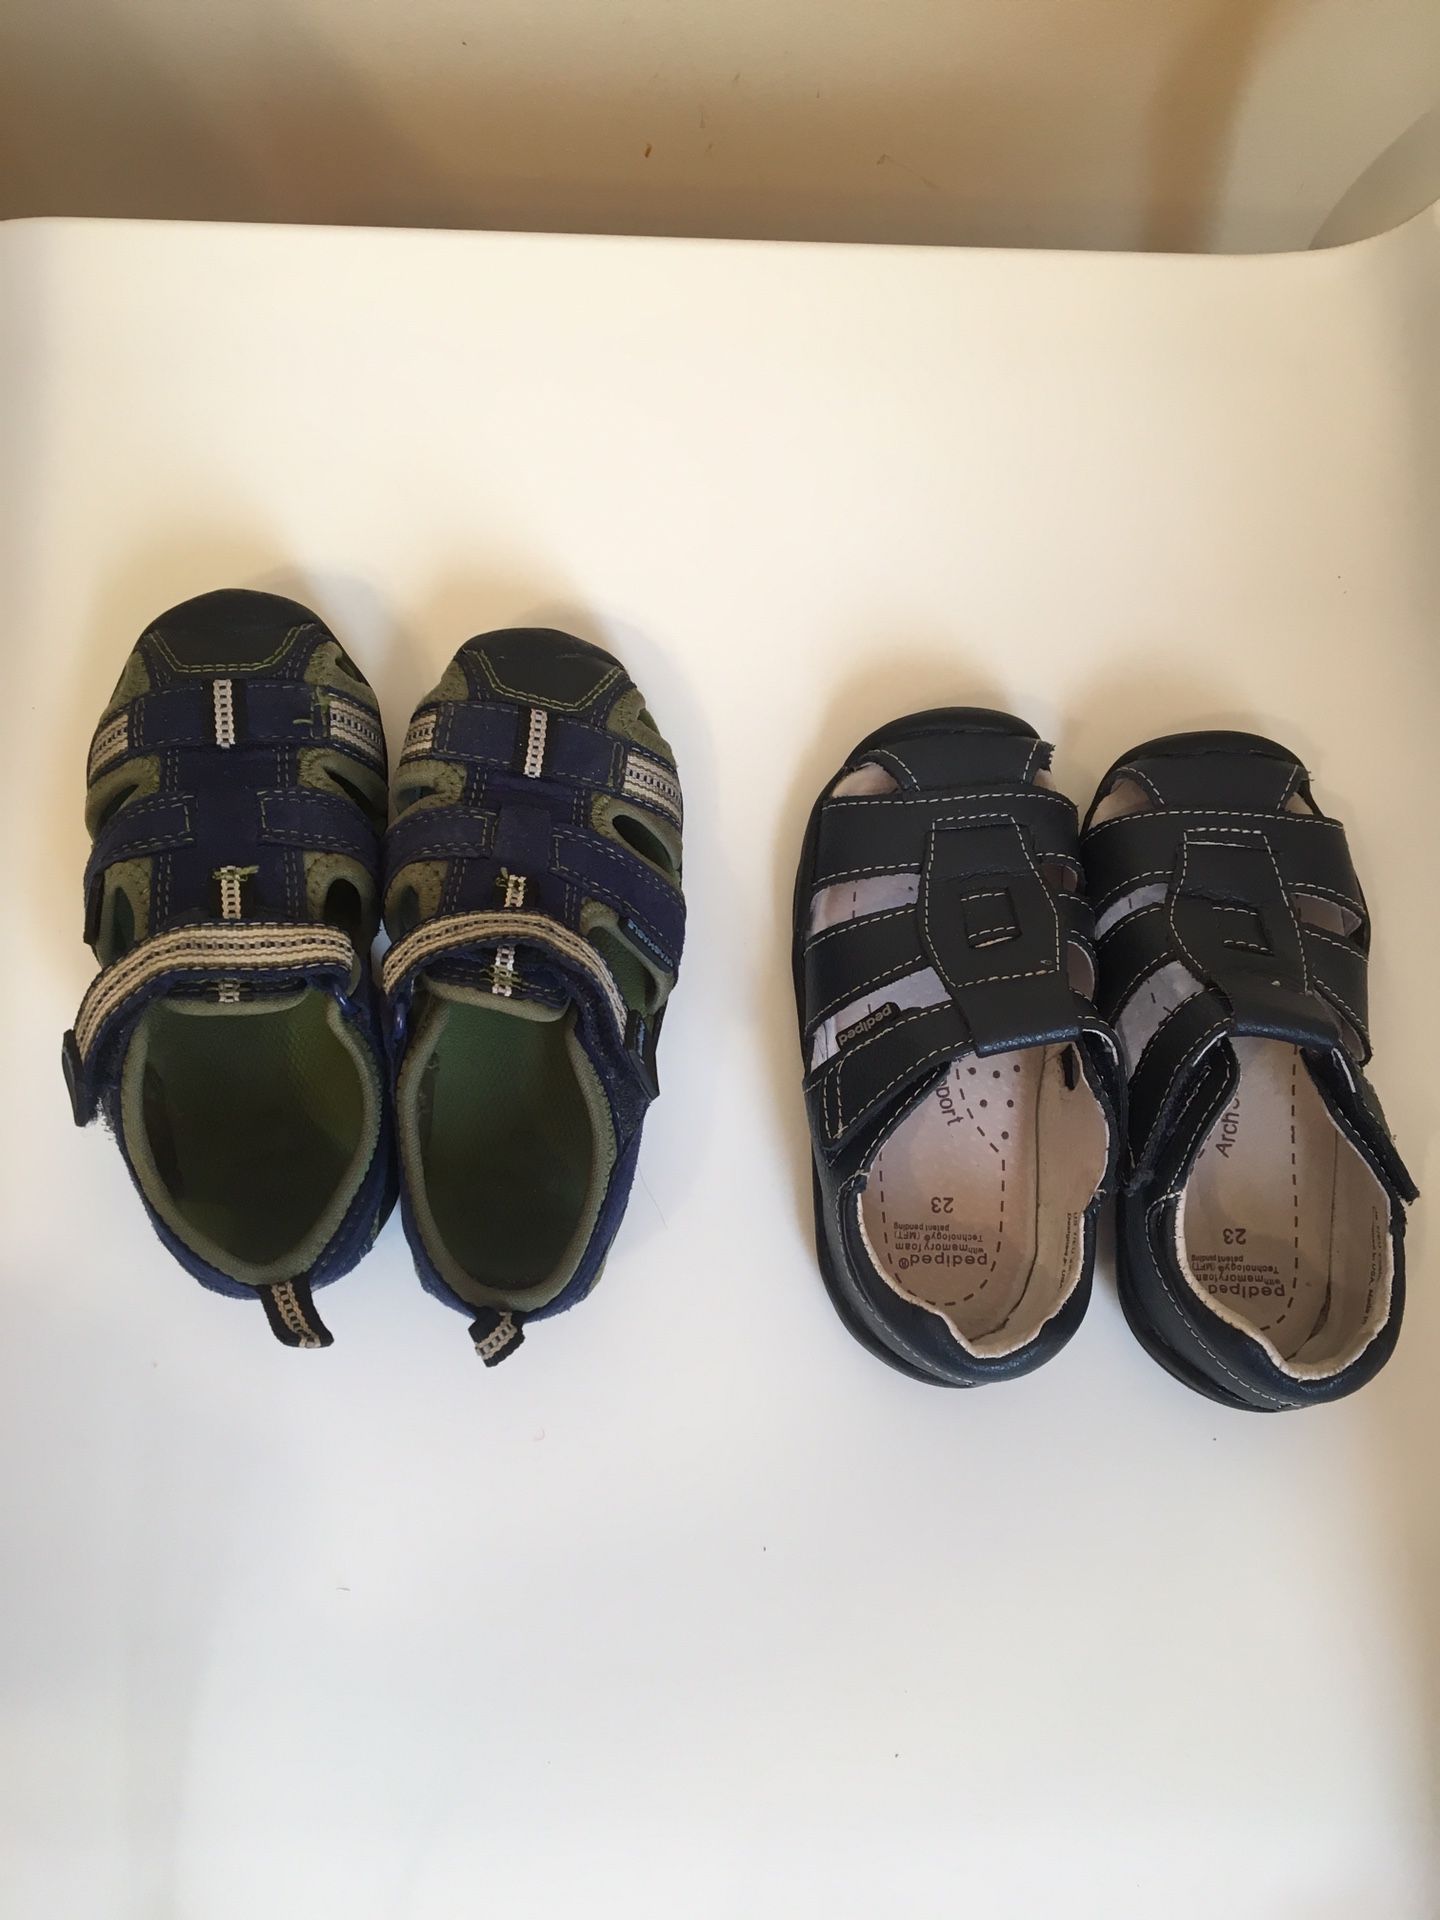 Pediped toddler shoes, 2 pairs